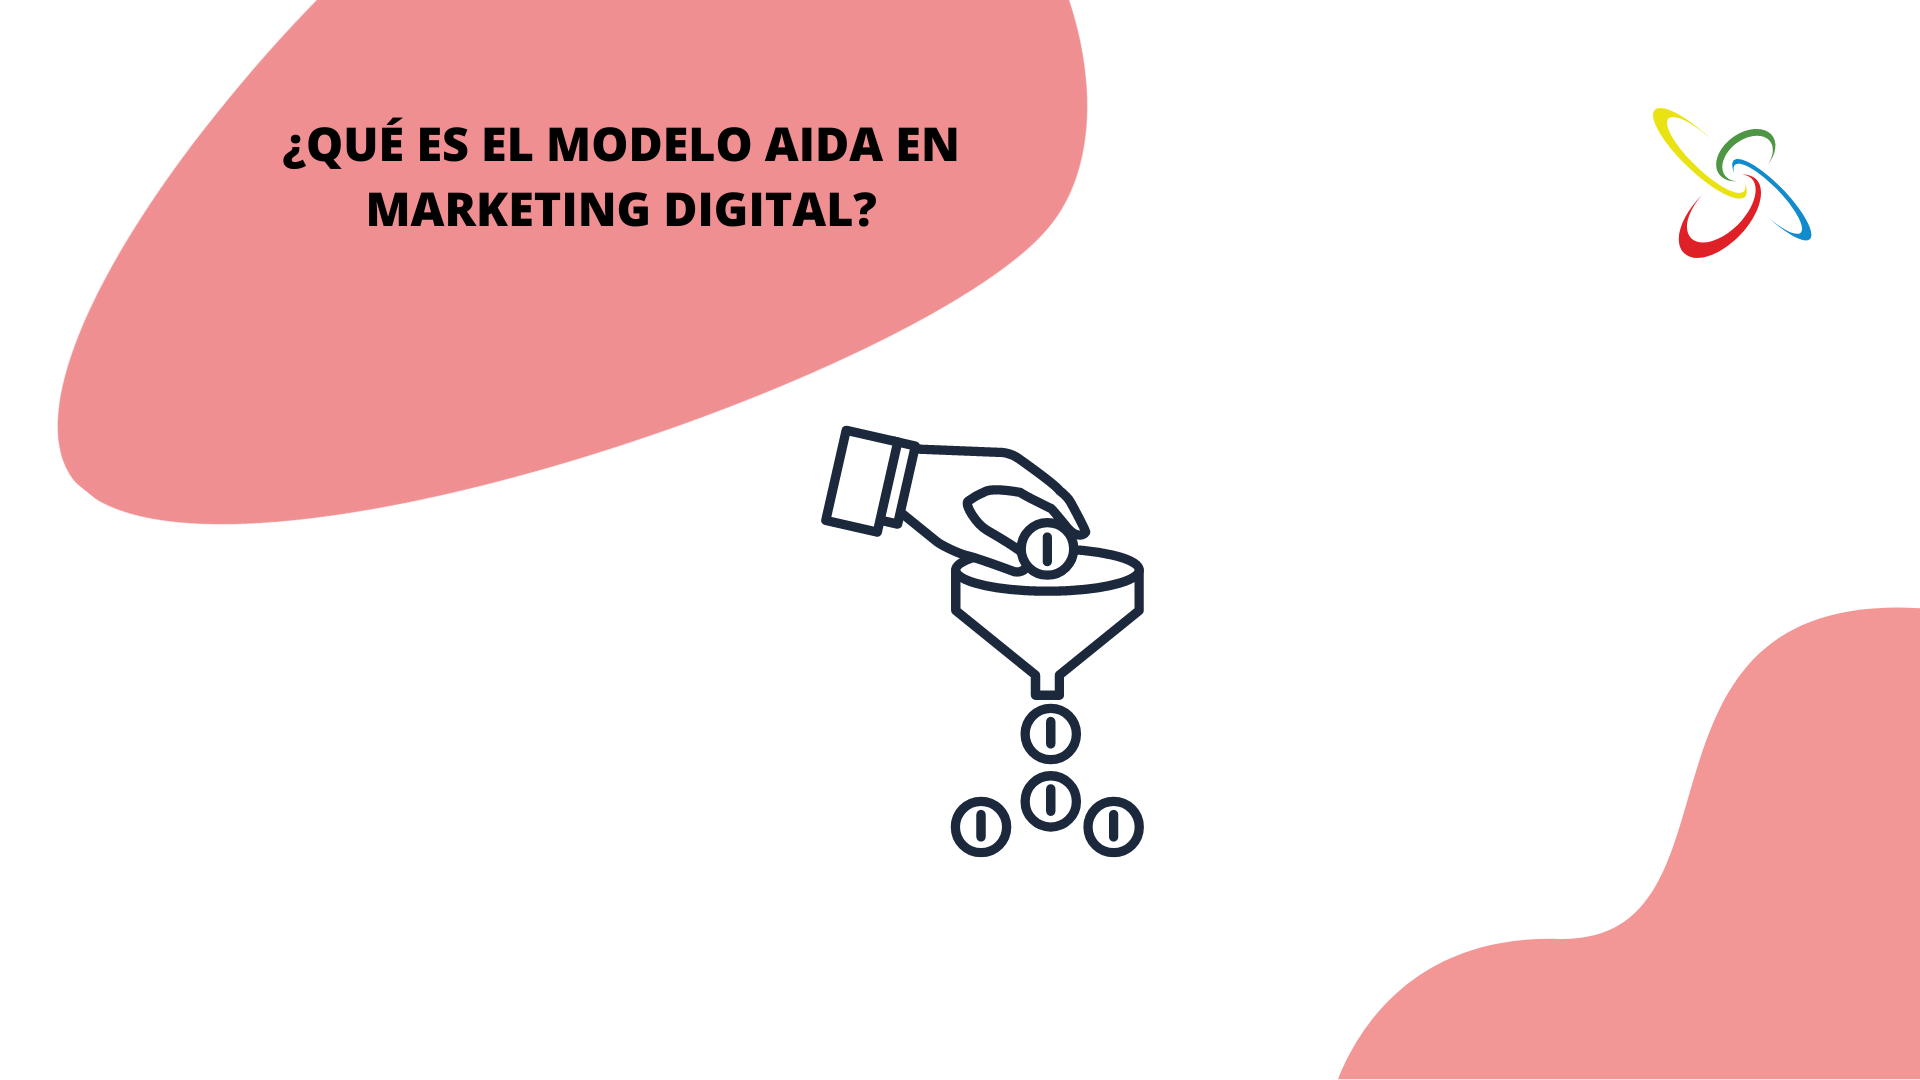 What is the AIDA model in digital marketing?